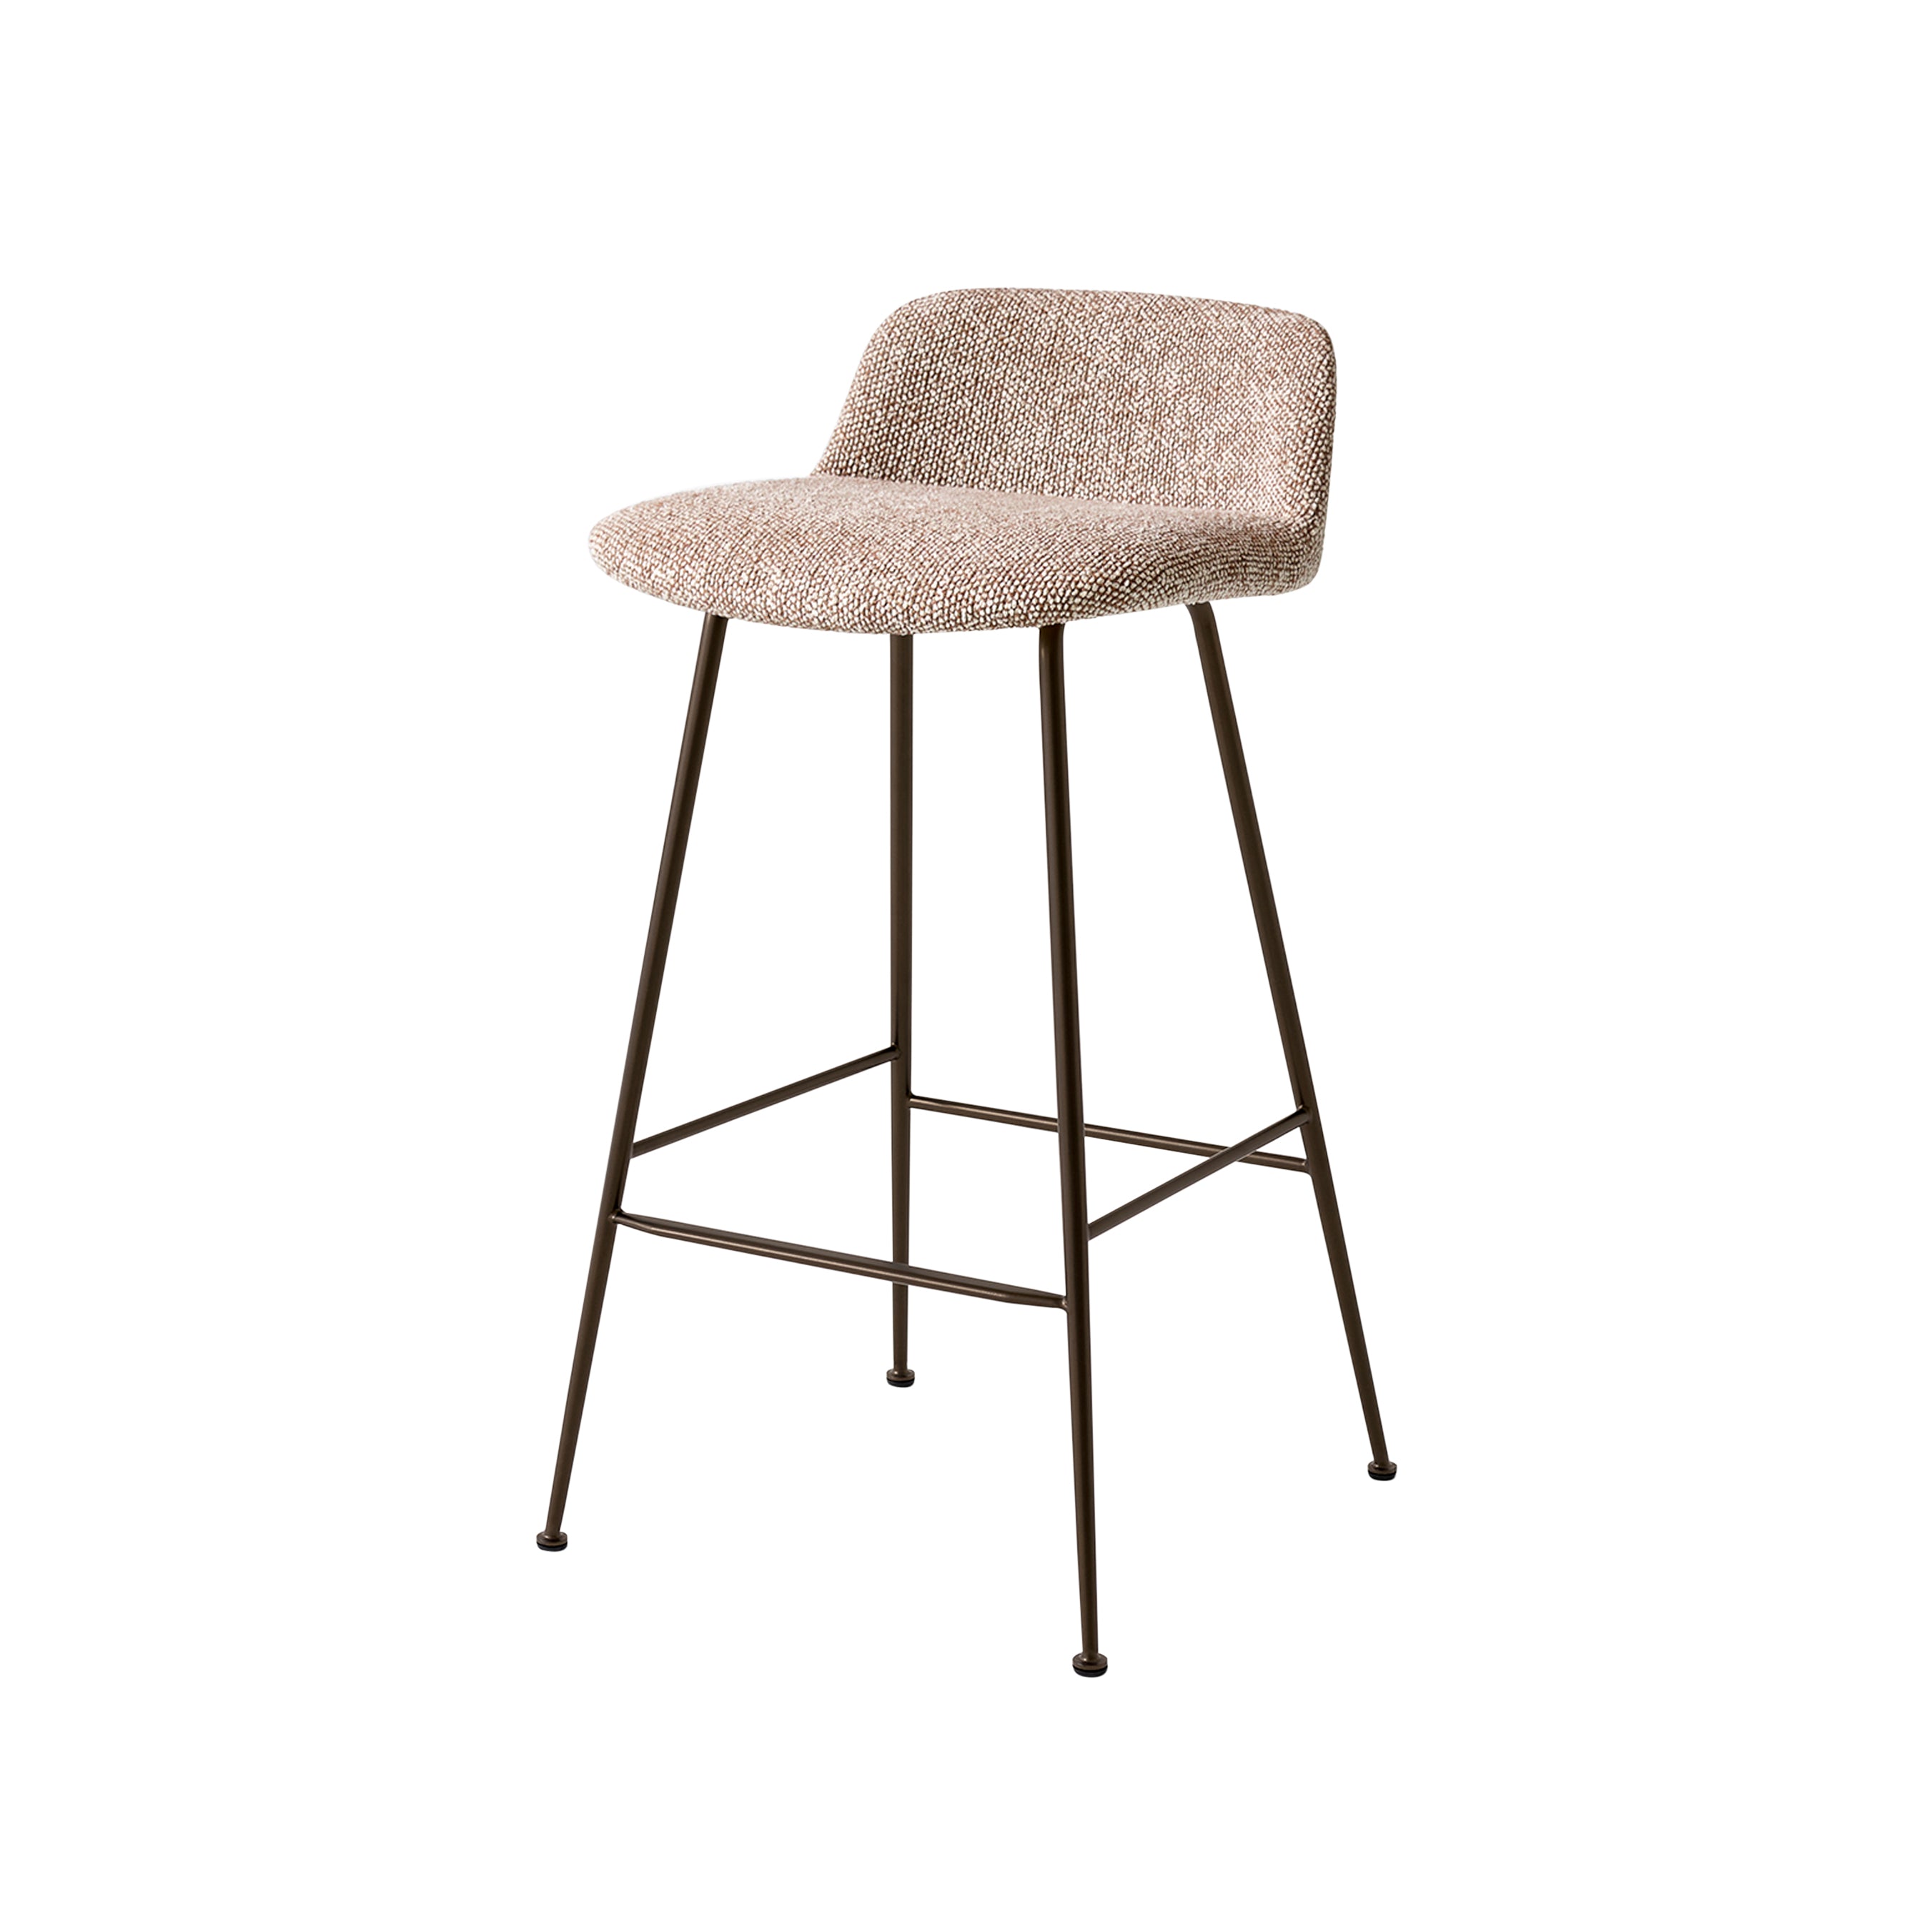 Rely Bar + Counter Stool: HW83 + HW88 + Counter (HW83) + Bronzed